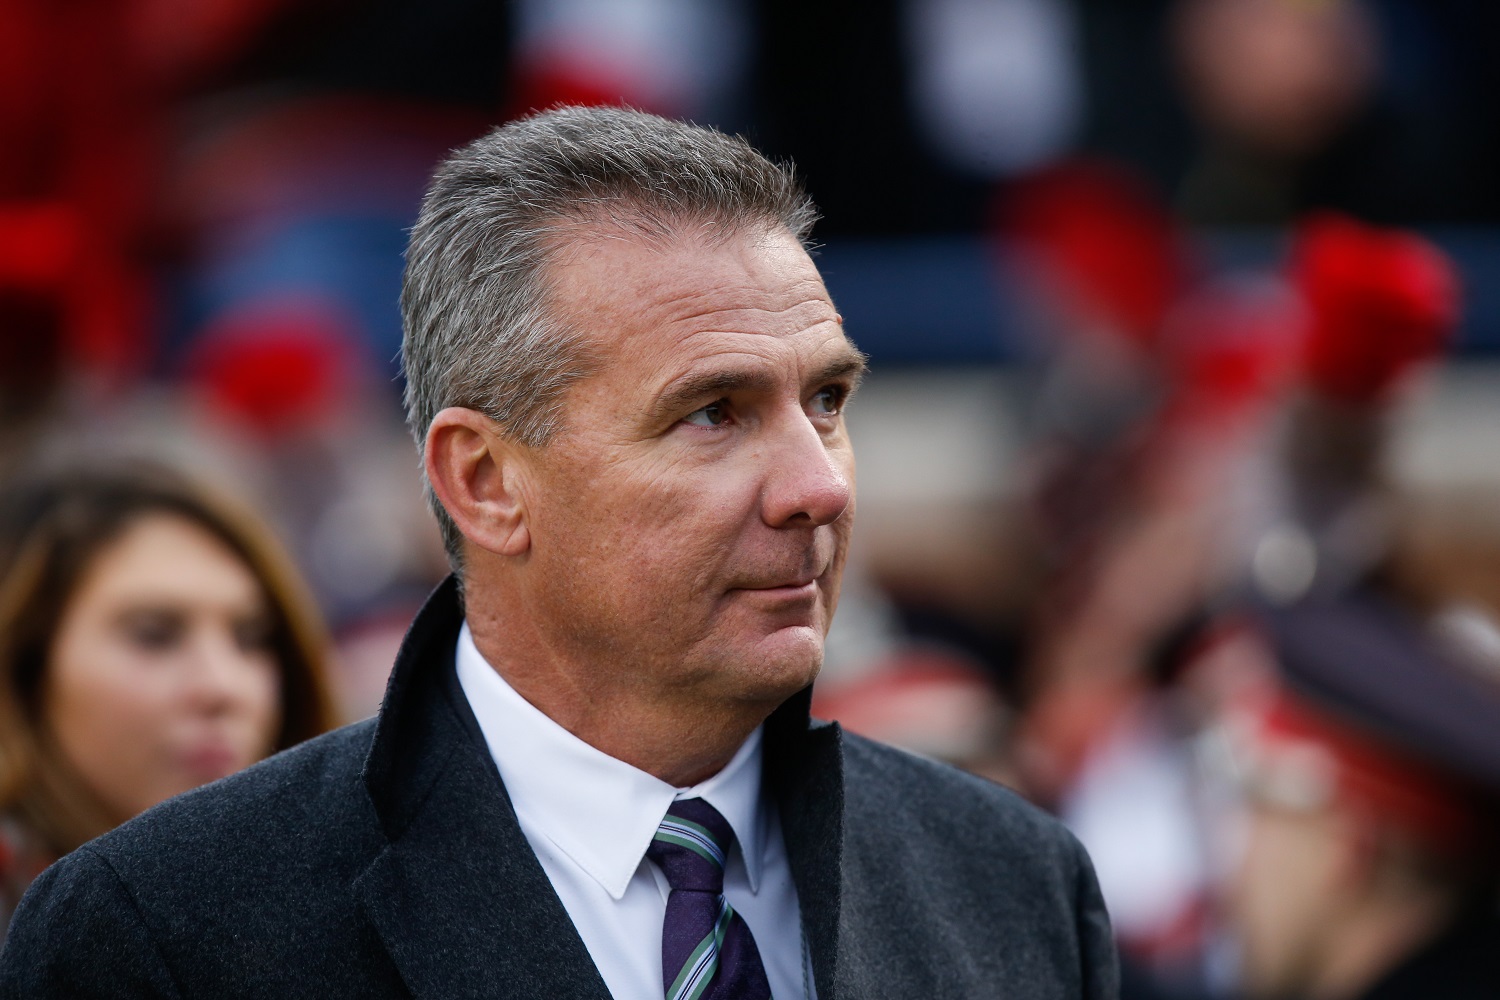 Urban Meyer Just Inched a Step Closer To Becoming the Jacksonville Jaguars’ Head Coach